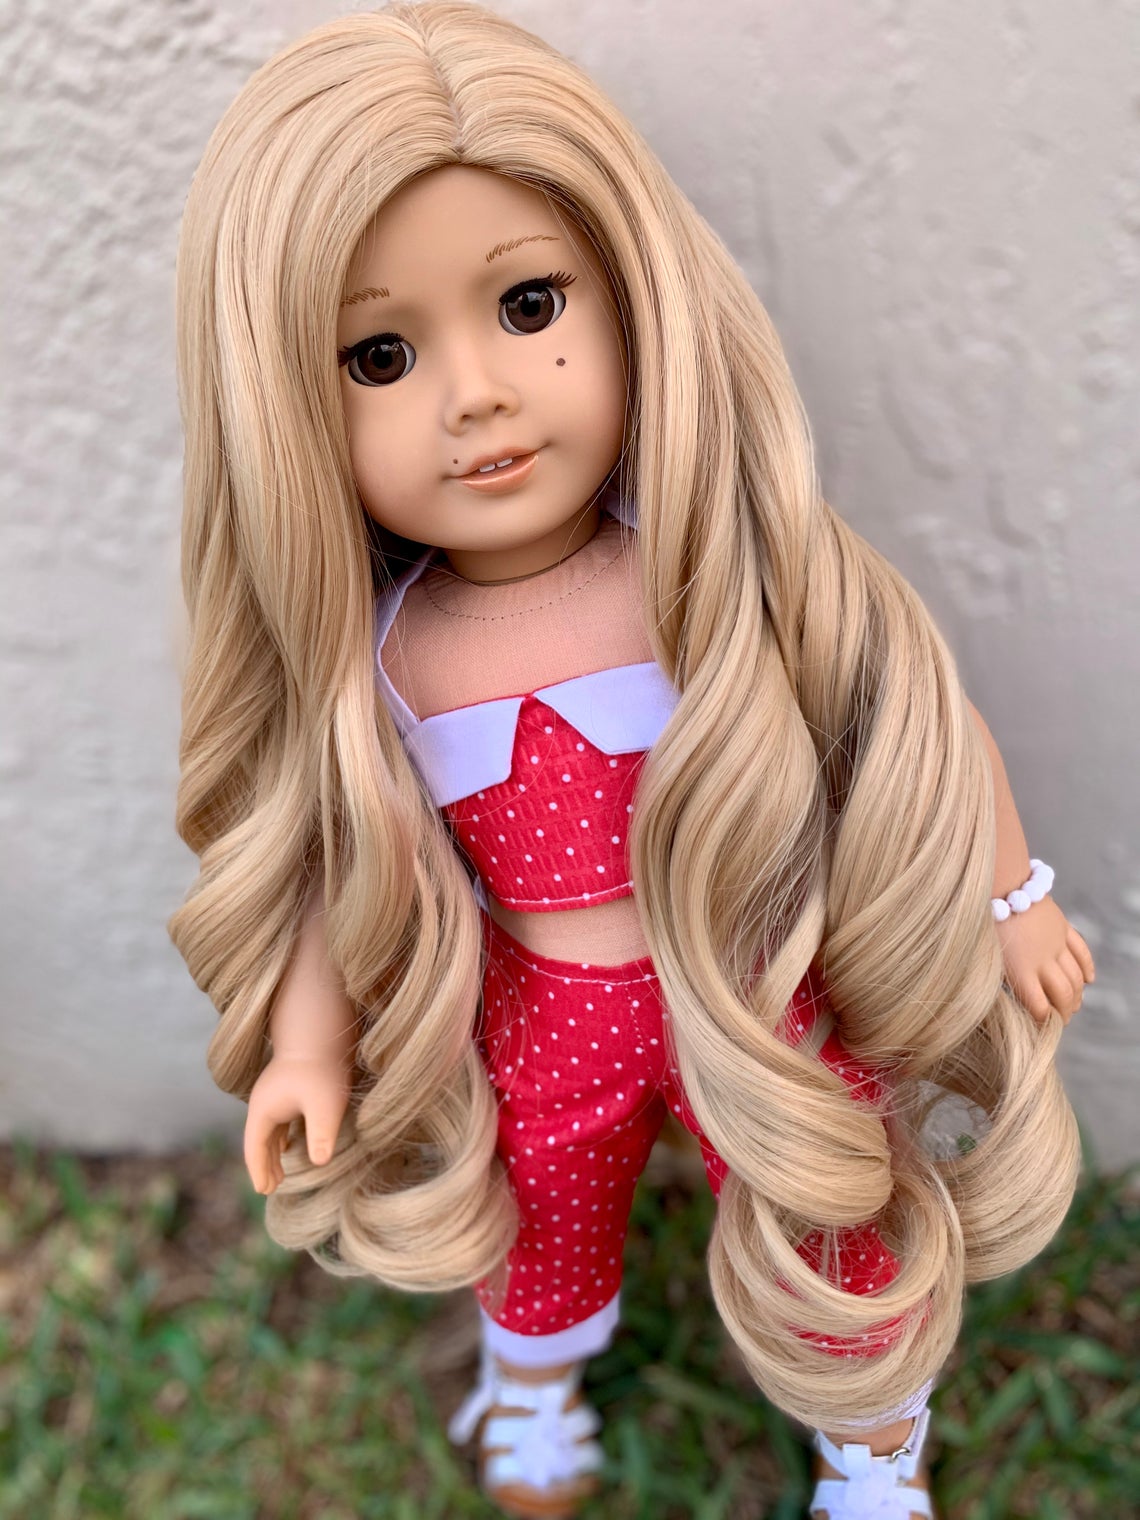 Zazou Dolls Exclusive Princess Honey WIG for 18 Inch dolls such as Our Generation, Journey Girls and American Girl